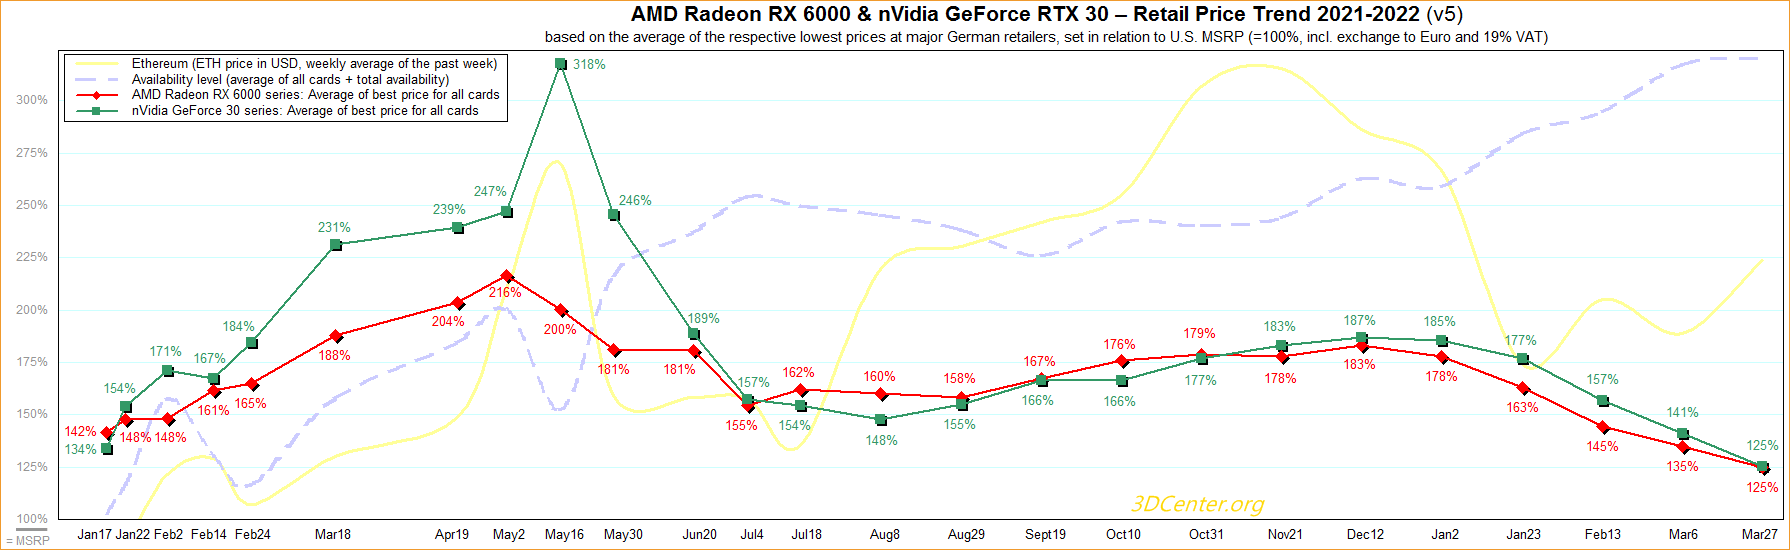 AMD-nVidia-Retail-Price-Trend-2021-2022-v5.png